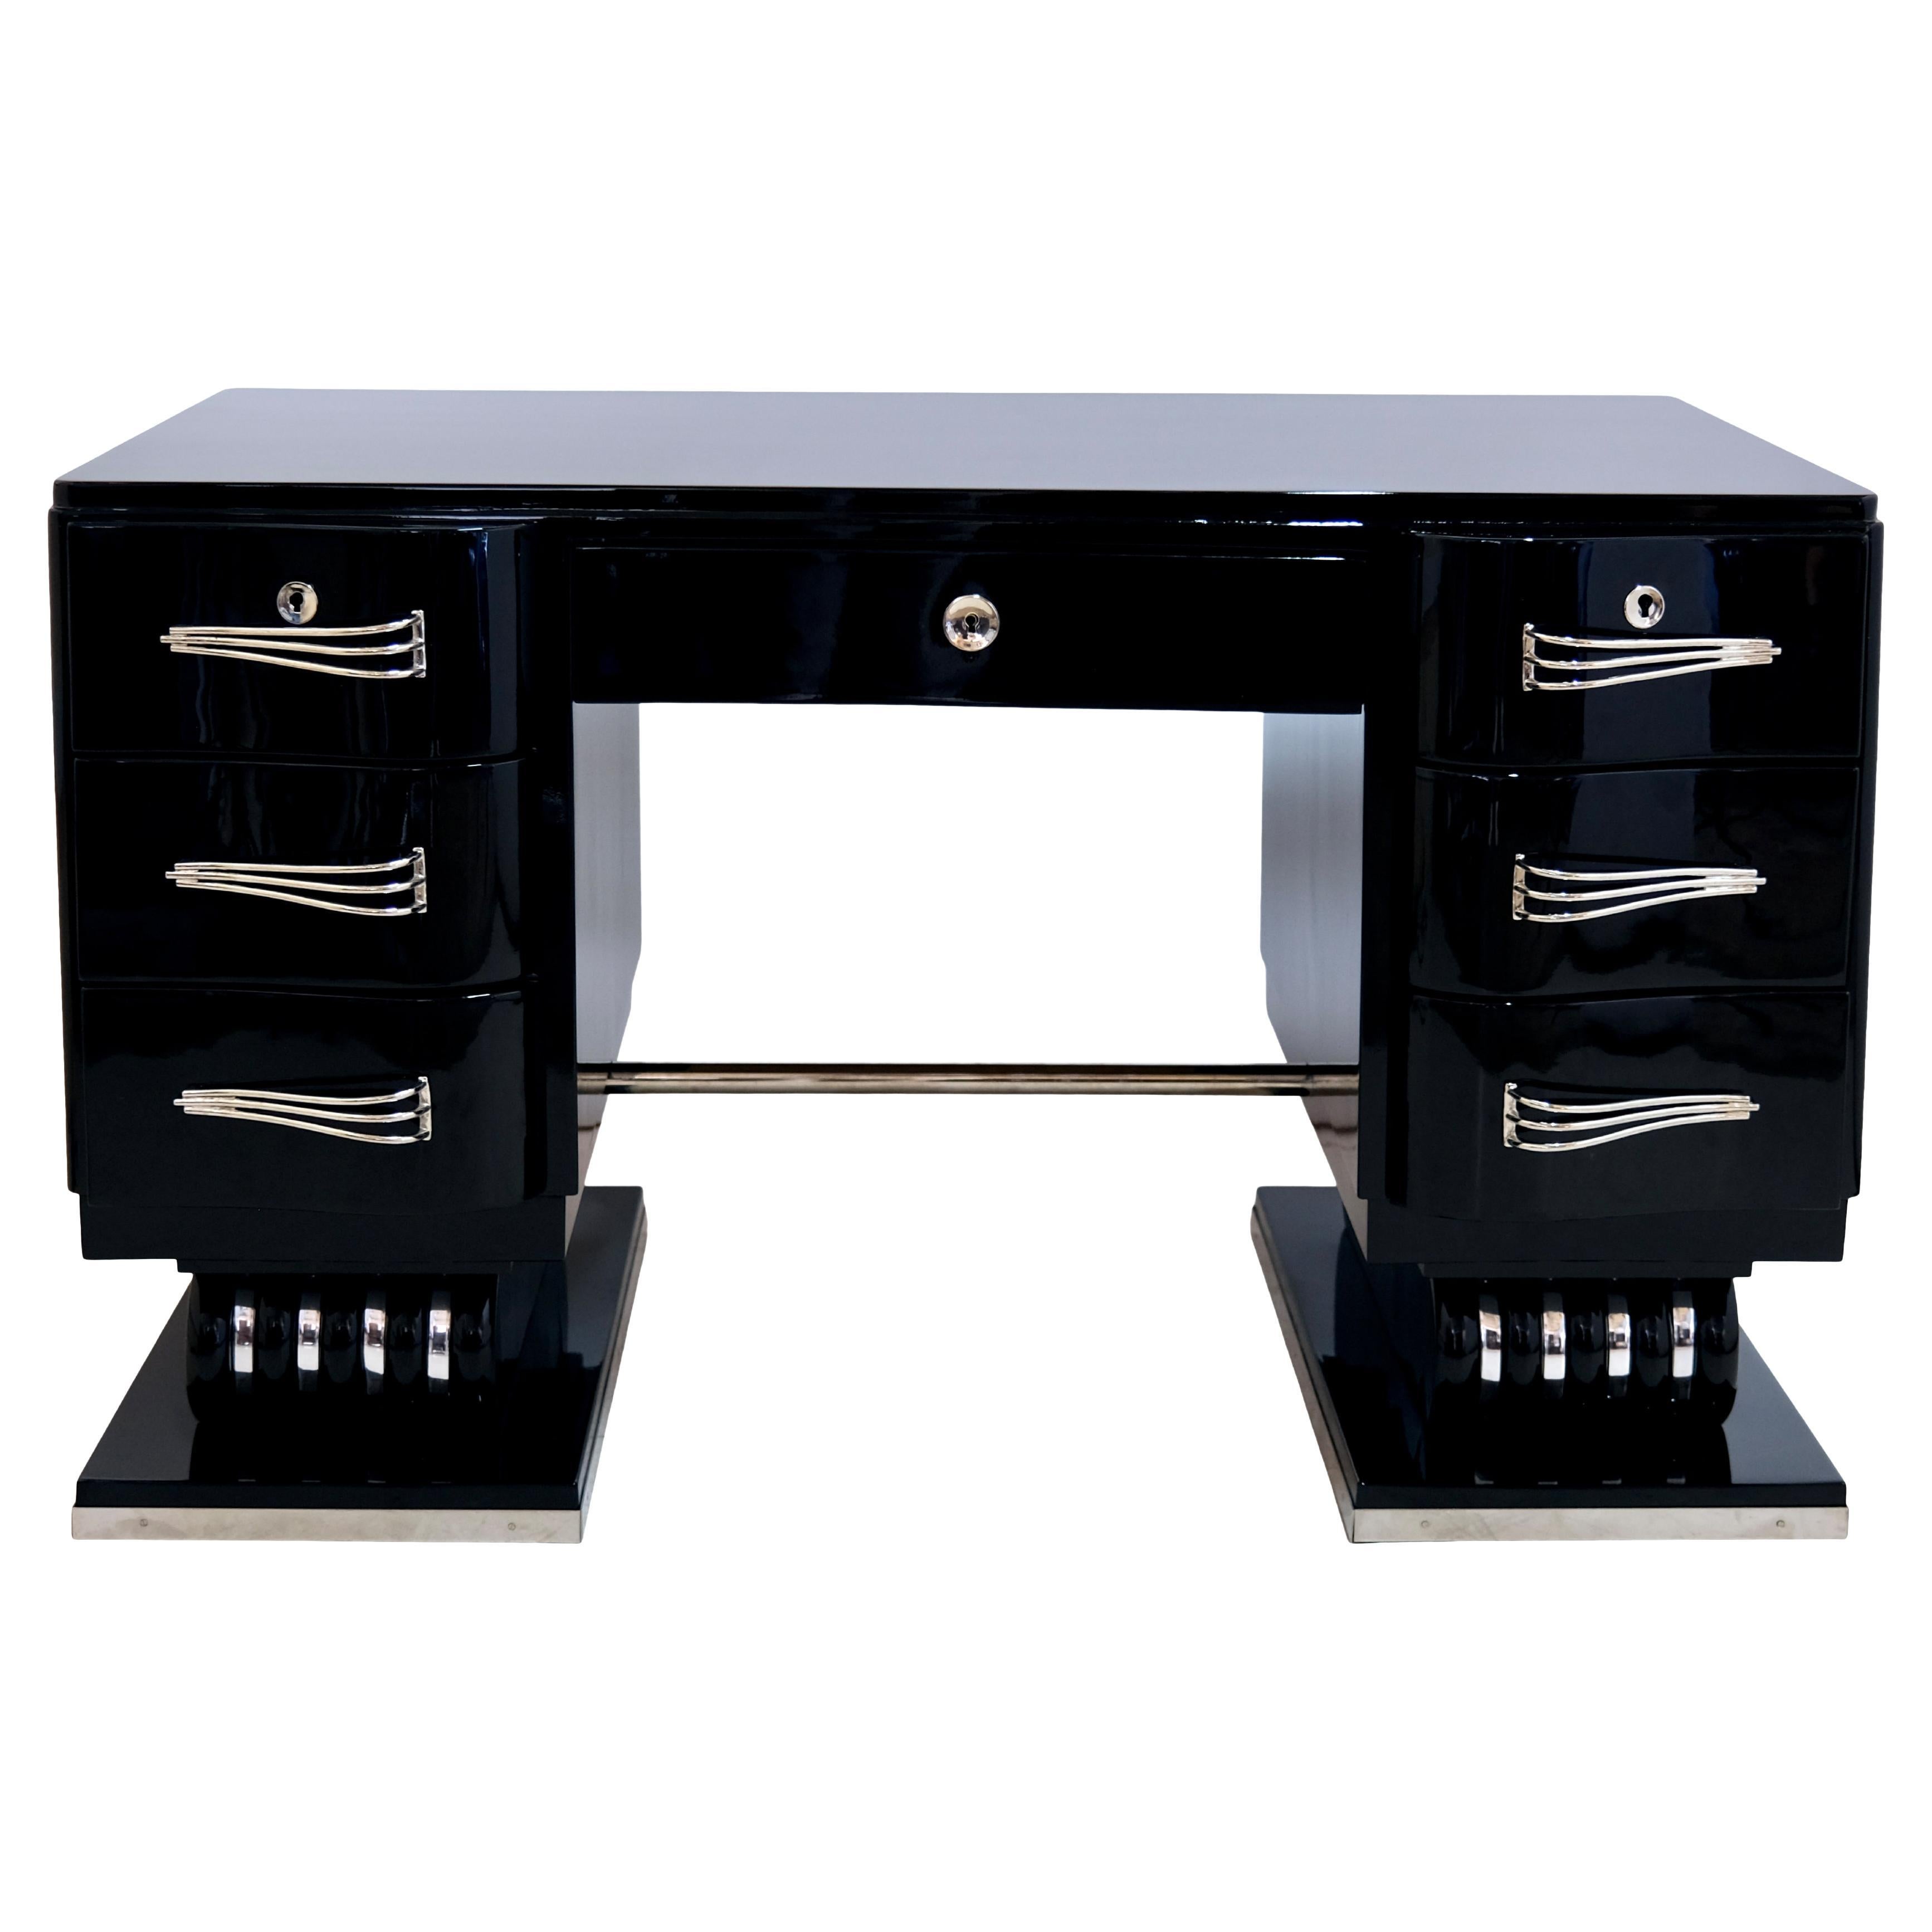 1930s French Art Deco Desk in Black Lacquer with Nickeled Metal Applications